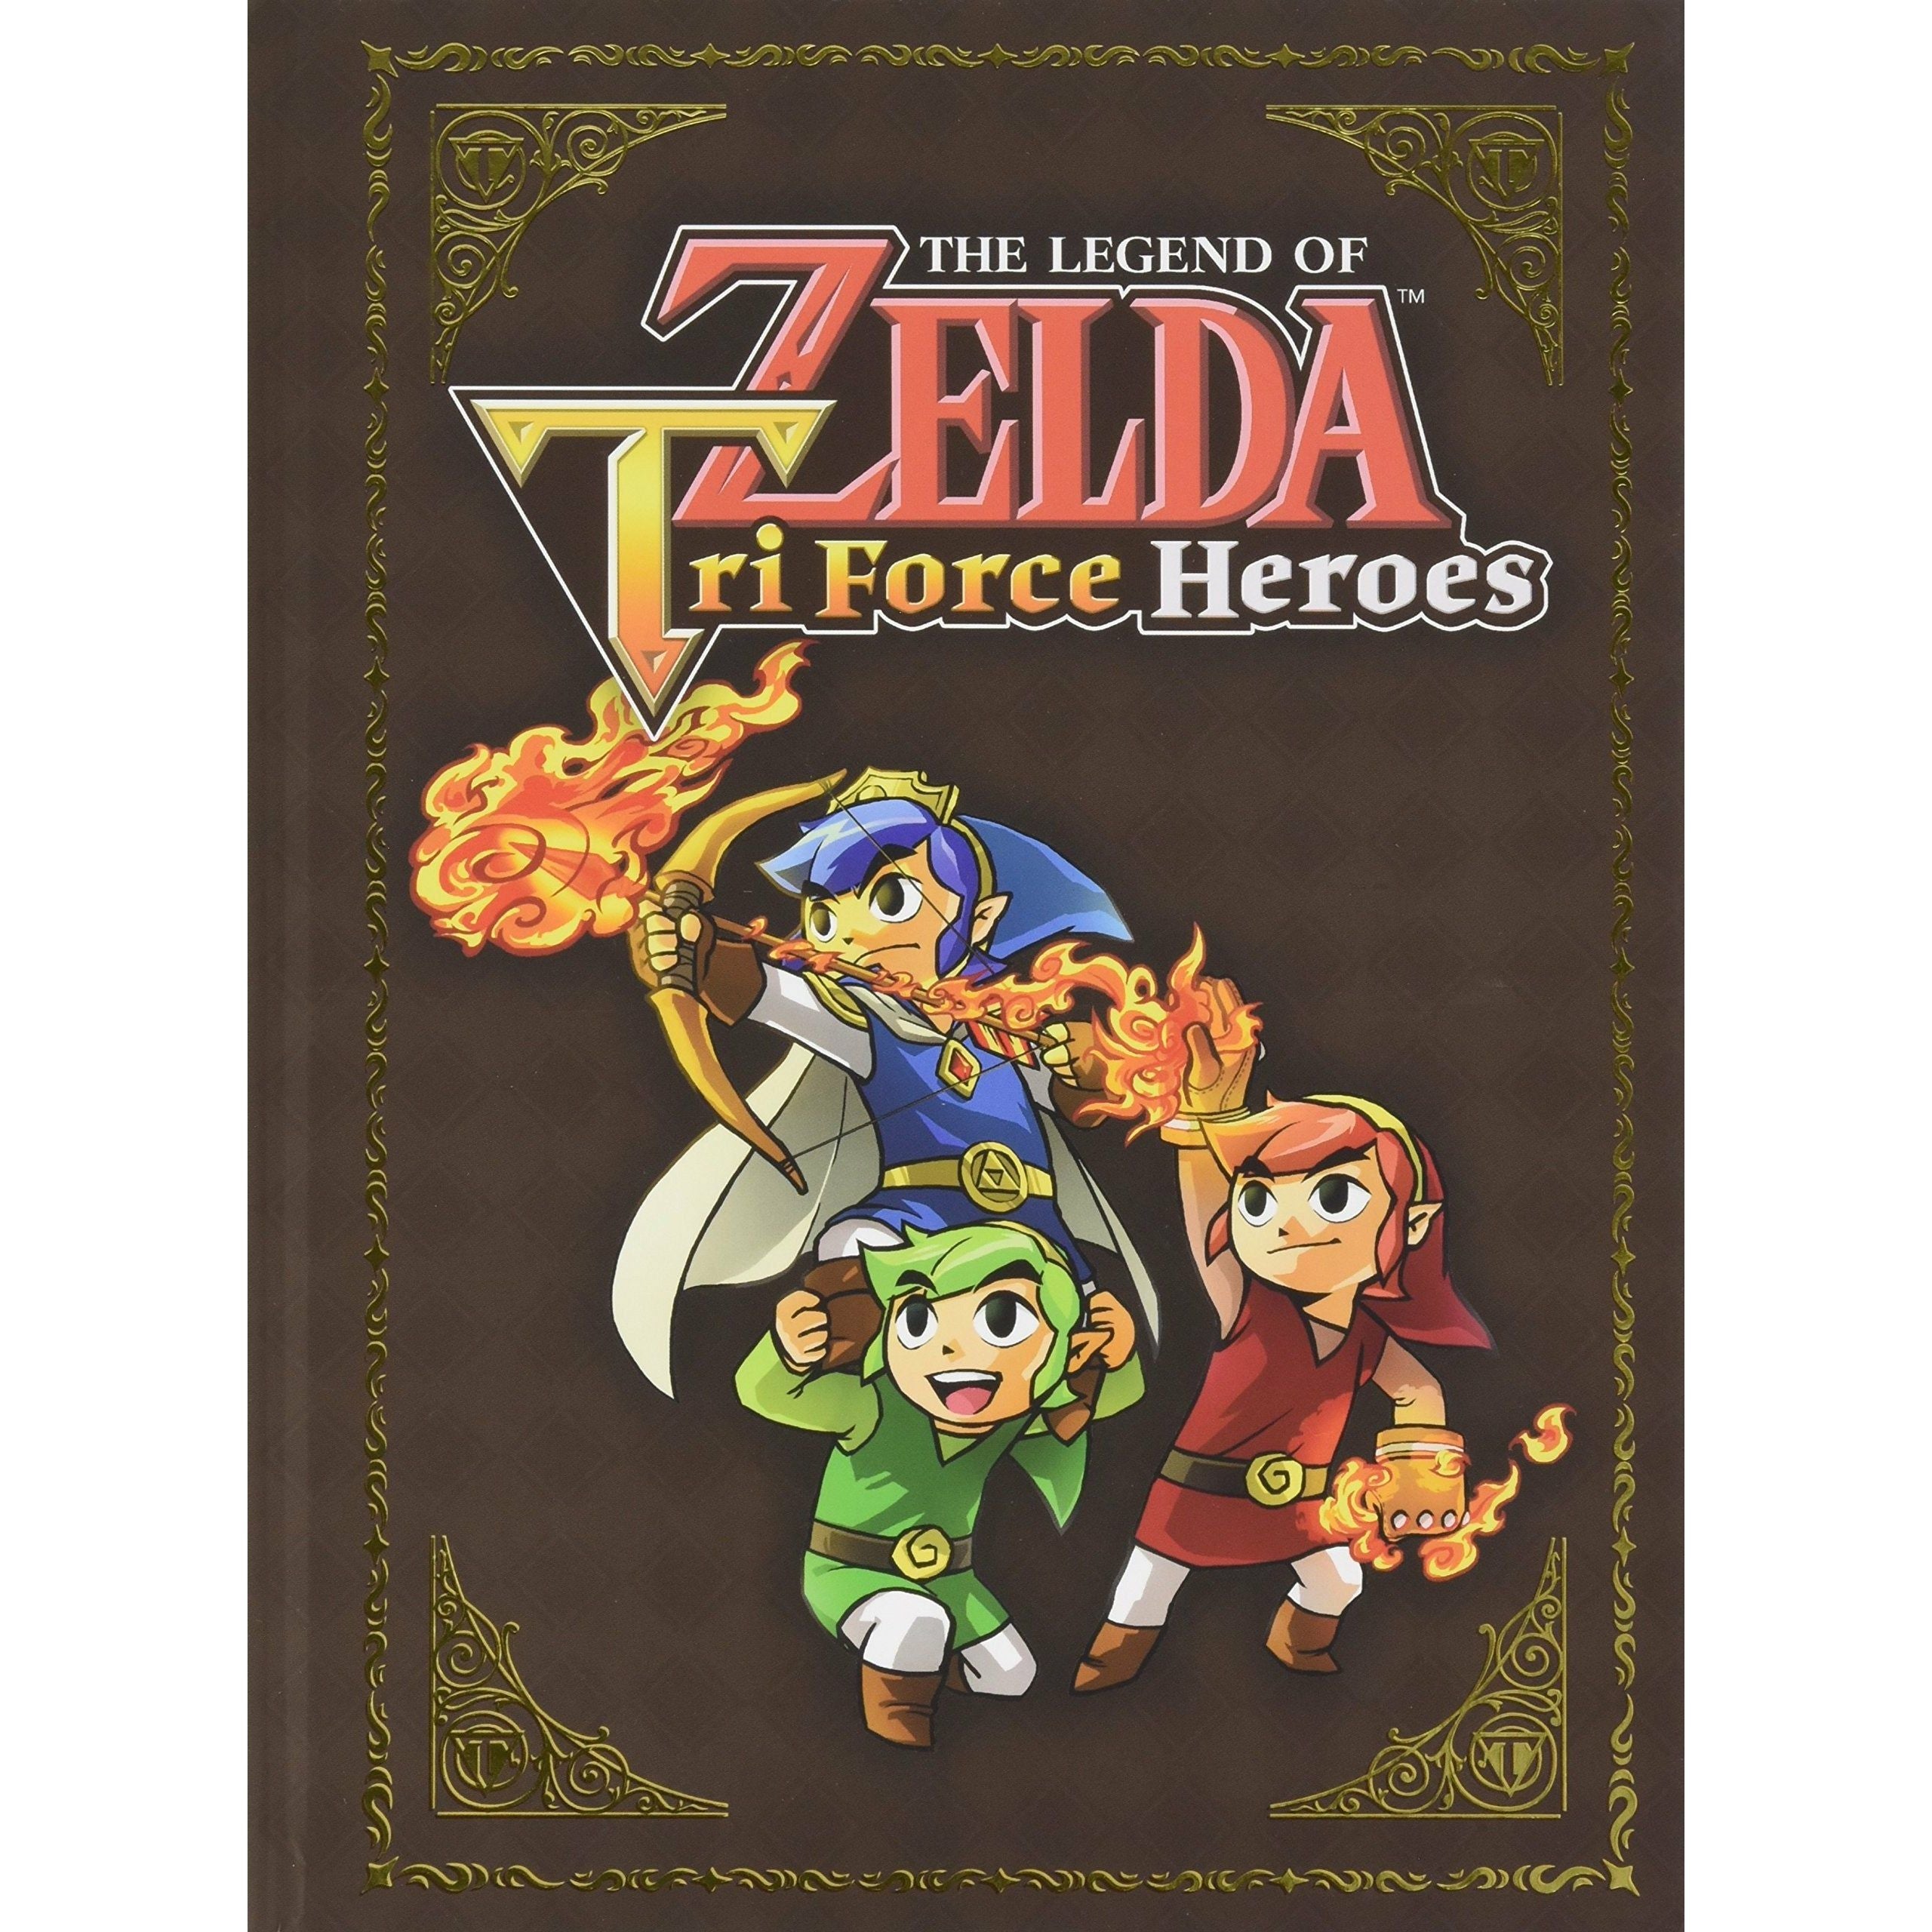 STRAT - The Legend of Zelda Tri Force Heroes Collector's Guide